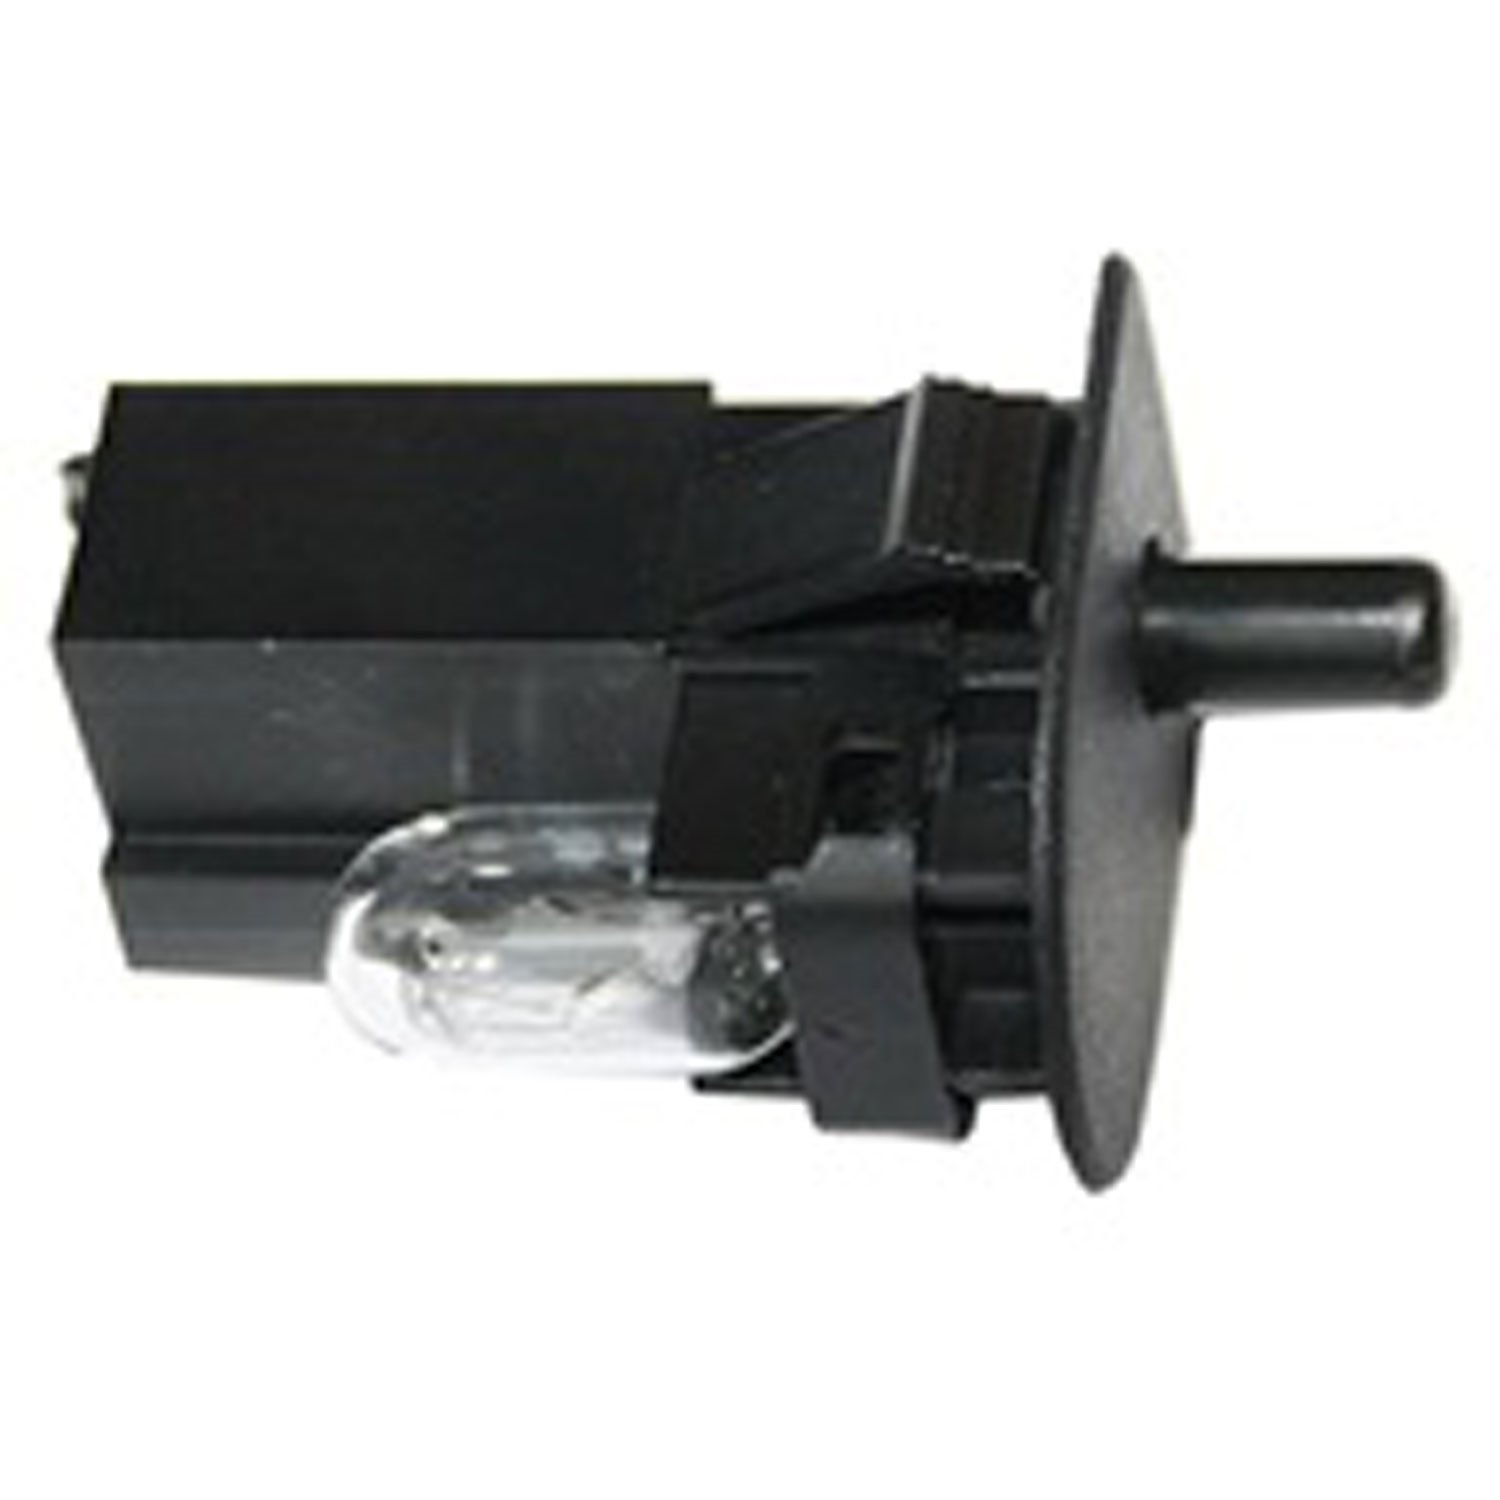 Replacement glove box light switch from Omix-ADA, Fits 99-10 Jeep WJ and WK Grand Cherokees.